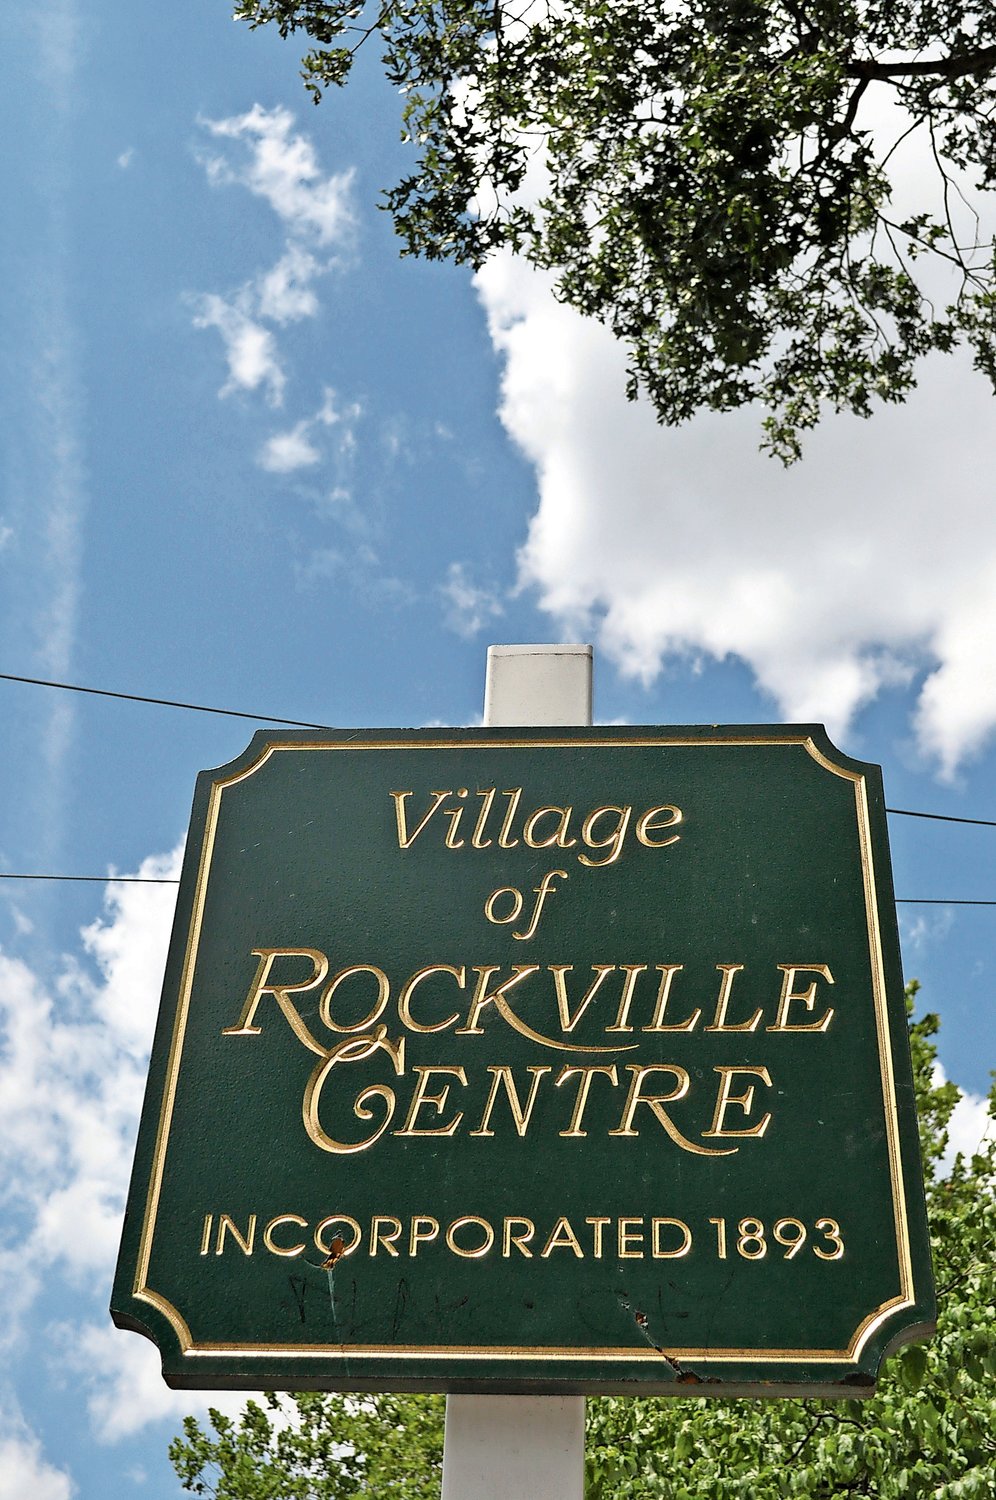 The Mayor’s Committee for Smart Growth in Rockville Centre will revive efforts of a previous village planning committee, which paused its meetings early last year.